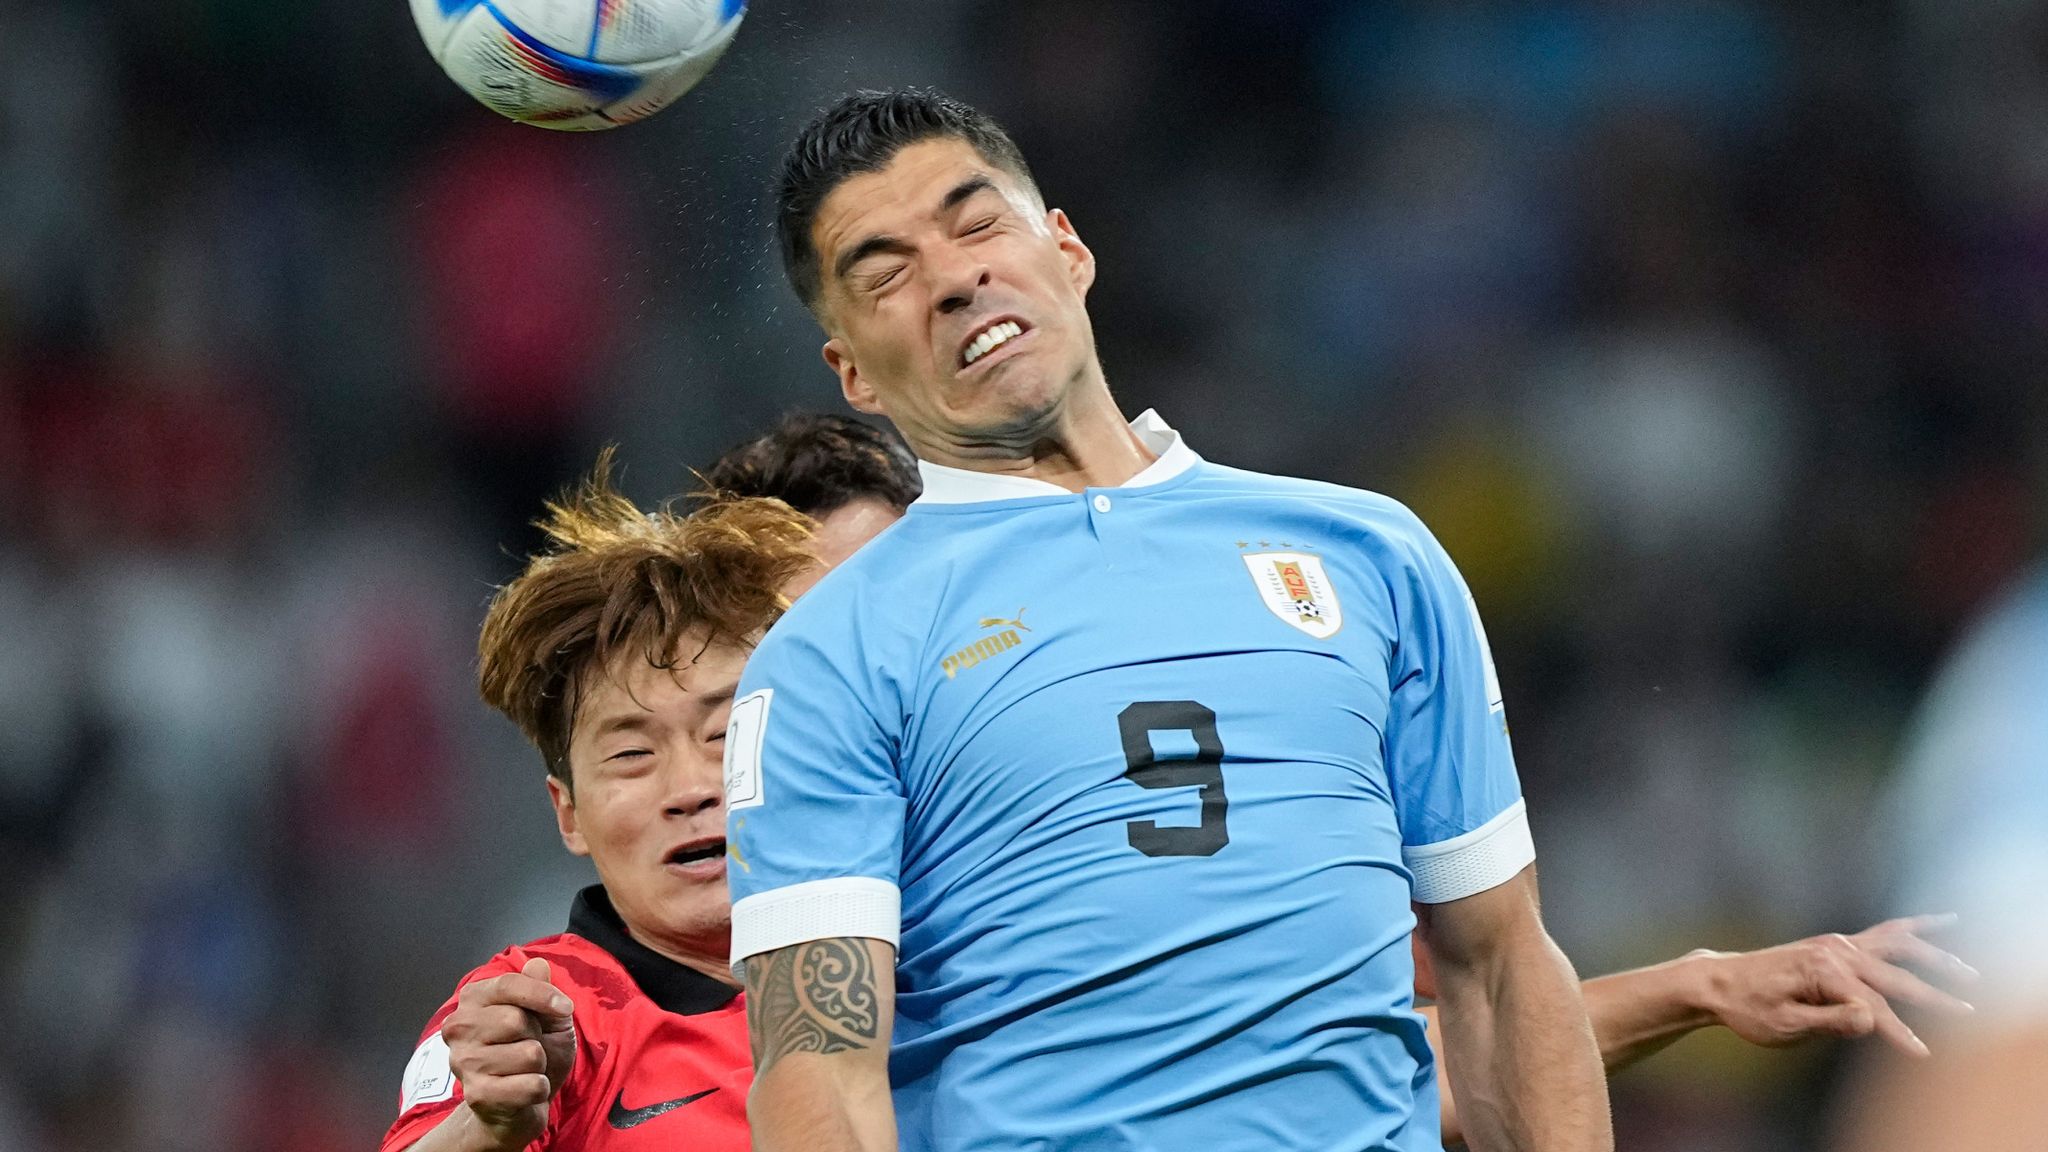 World Cup 2022 - Uruguay 0-0 South Korea: Goalless draw in Group H opener | Football News | Sky Sports